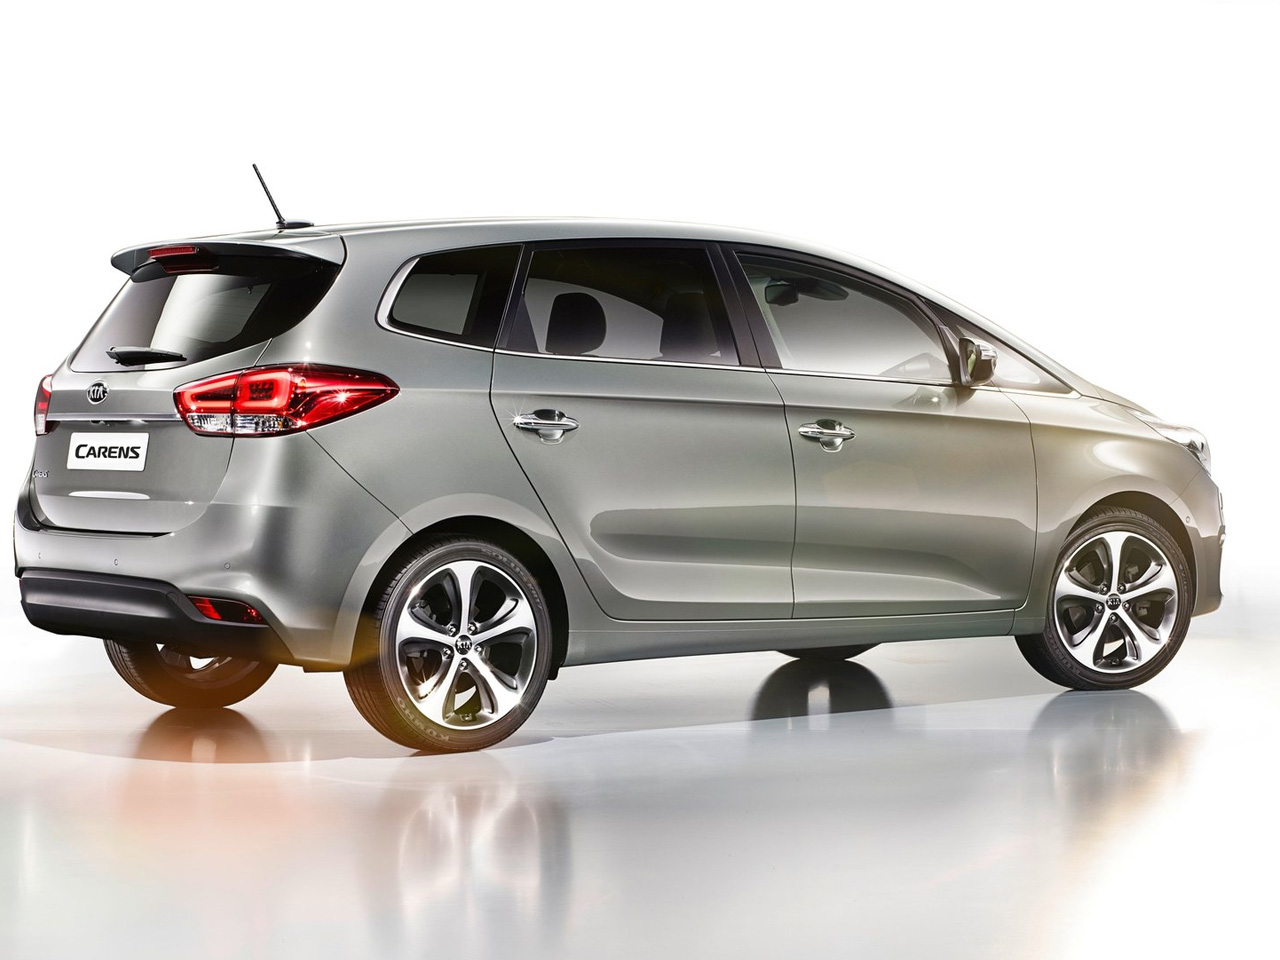 2013 Kia Carens 2013-Kia-Carens-Front-Side â€“ Find more guide and ...